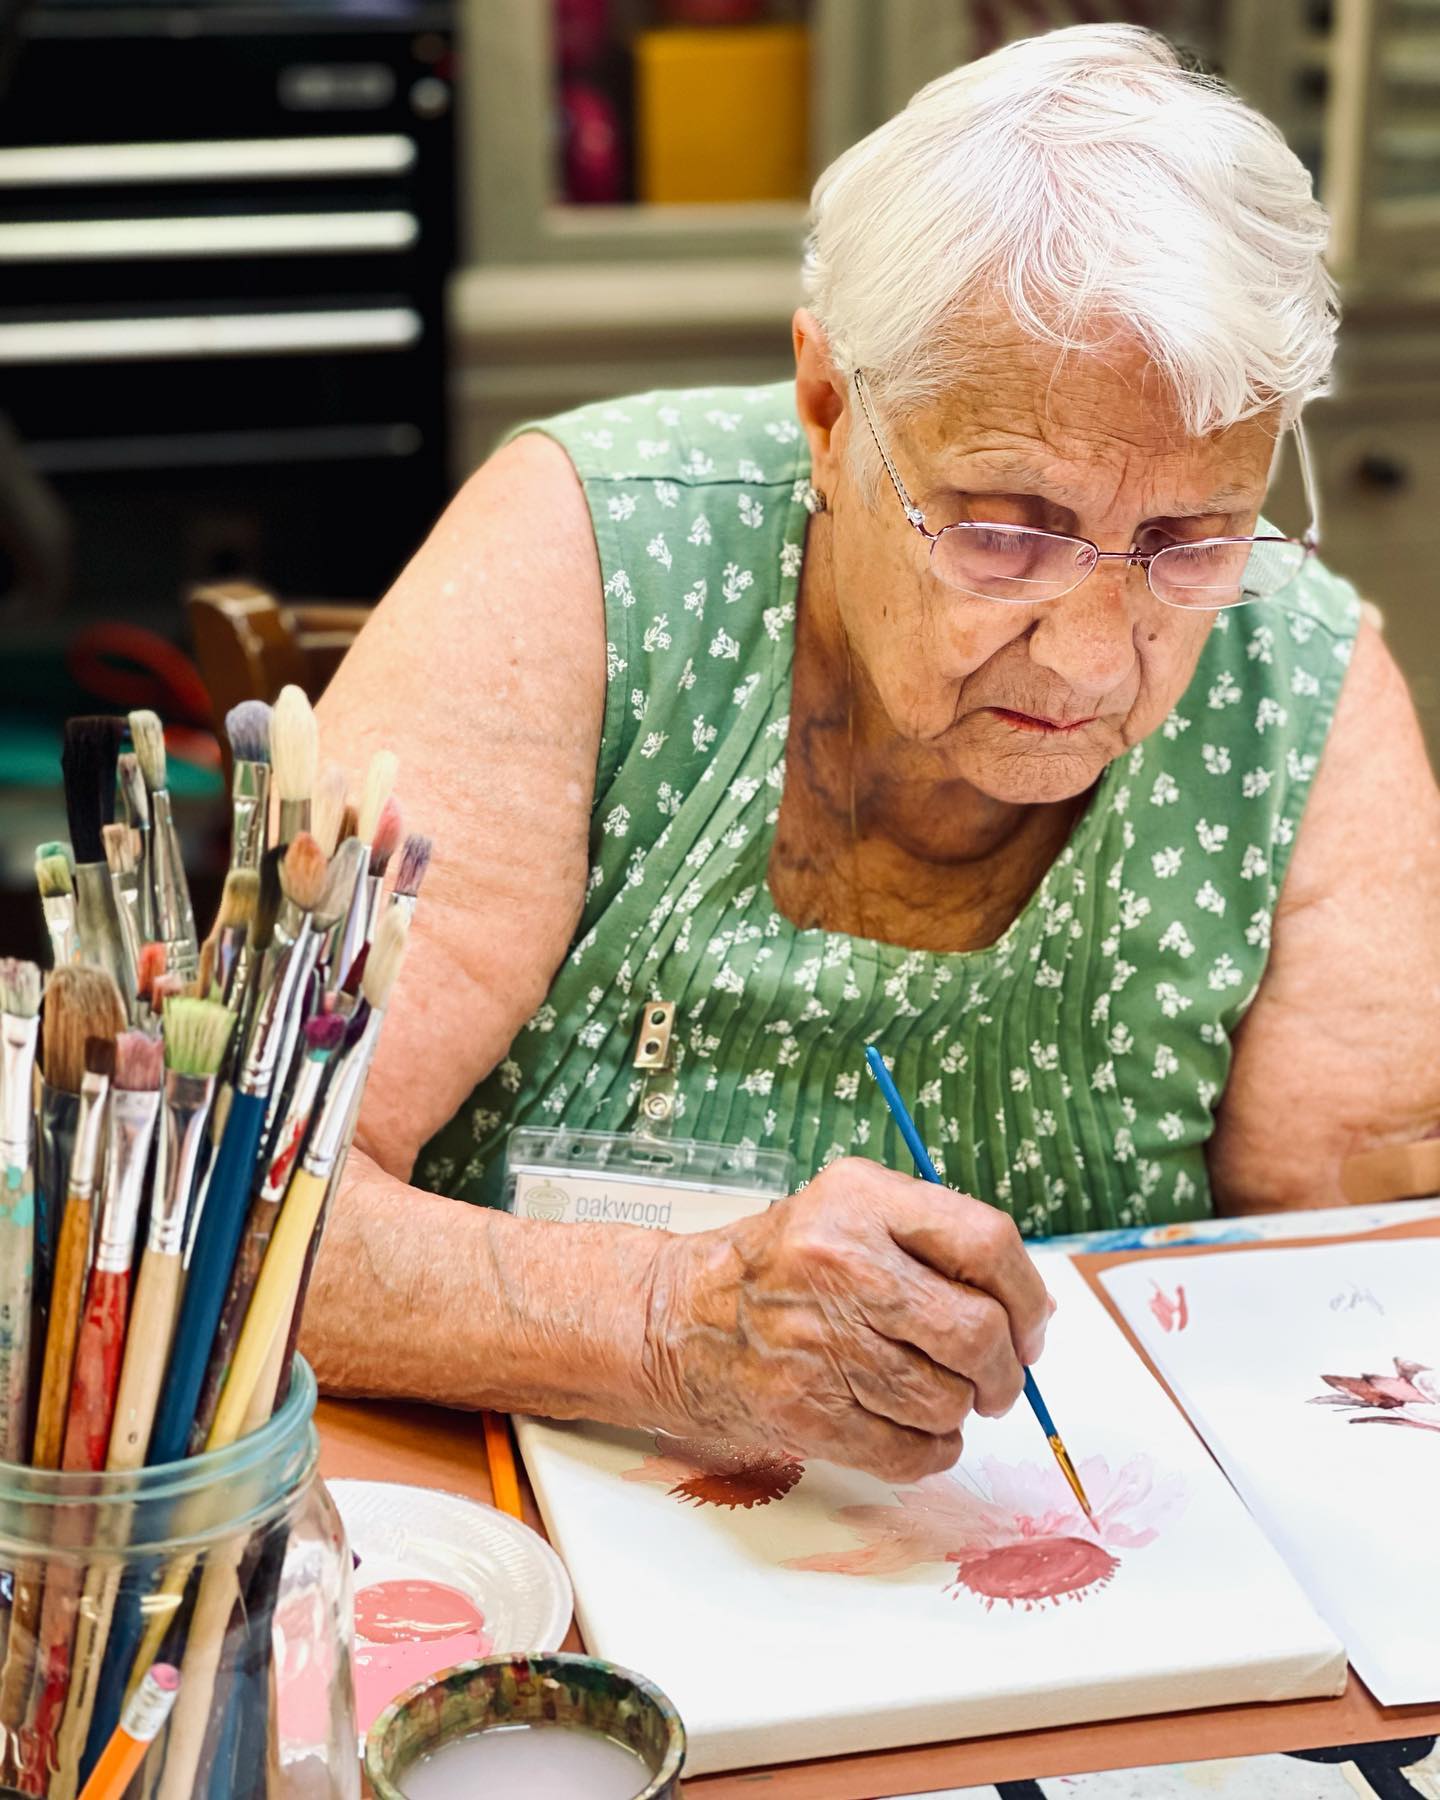 Oakwood Creative Care uses creative therapy to spark joy for seniors with cognitive and physical challenges, such as those resulting from a stroke